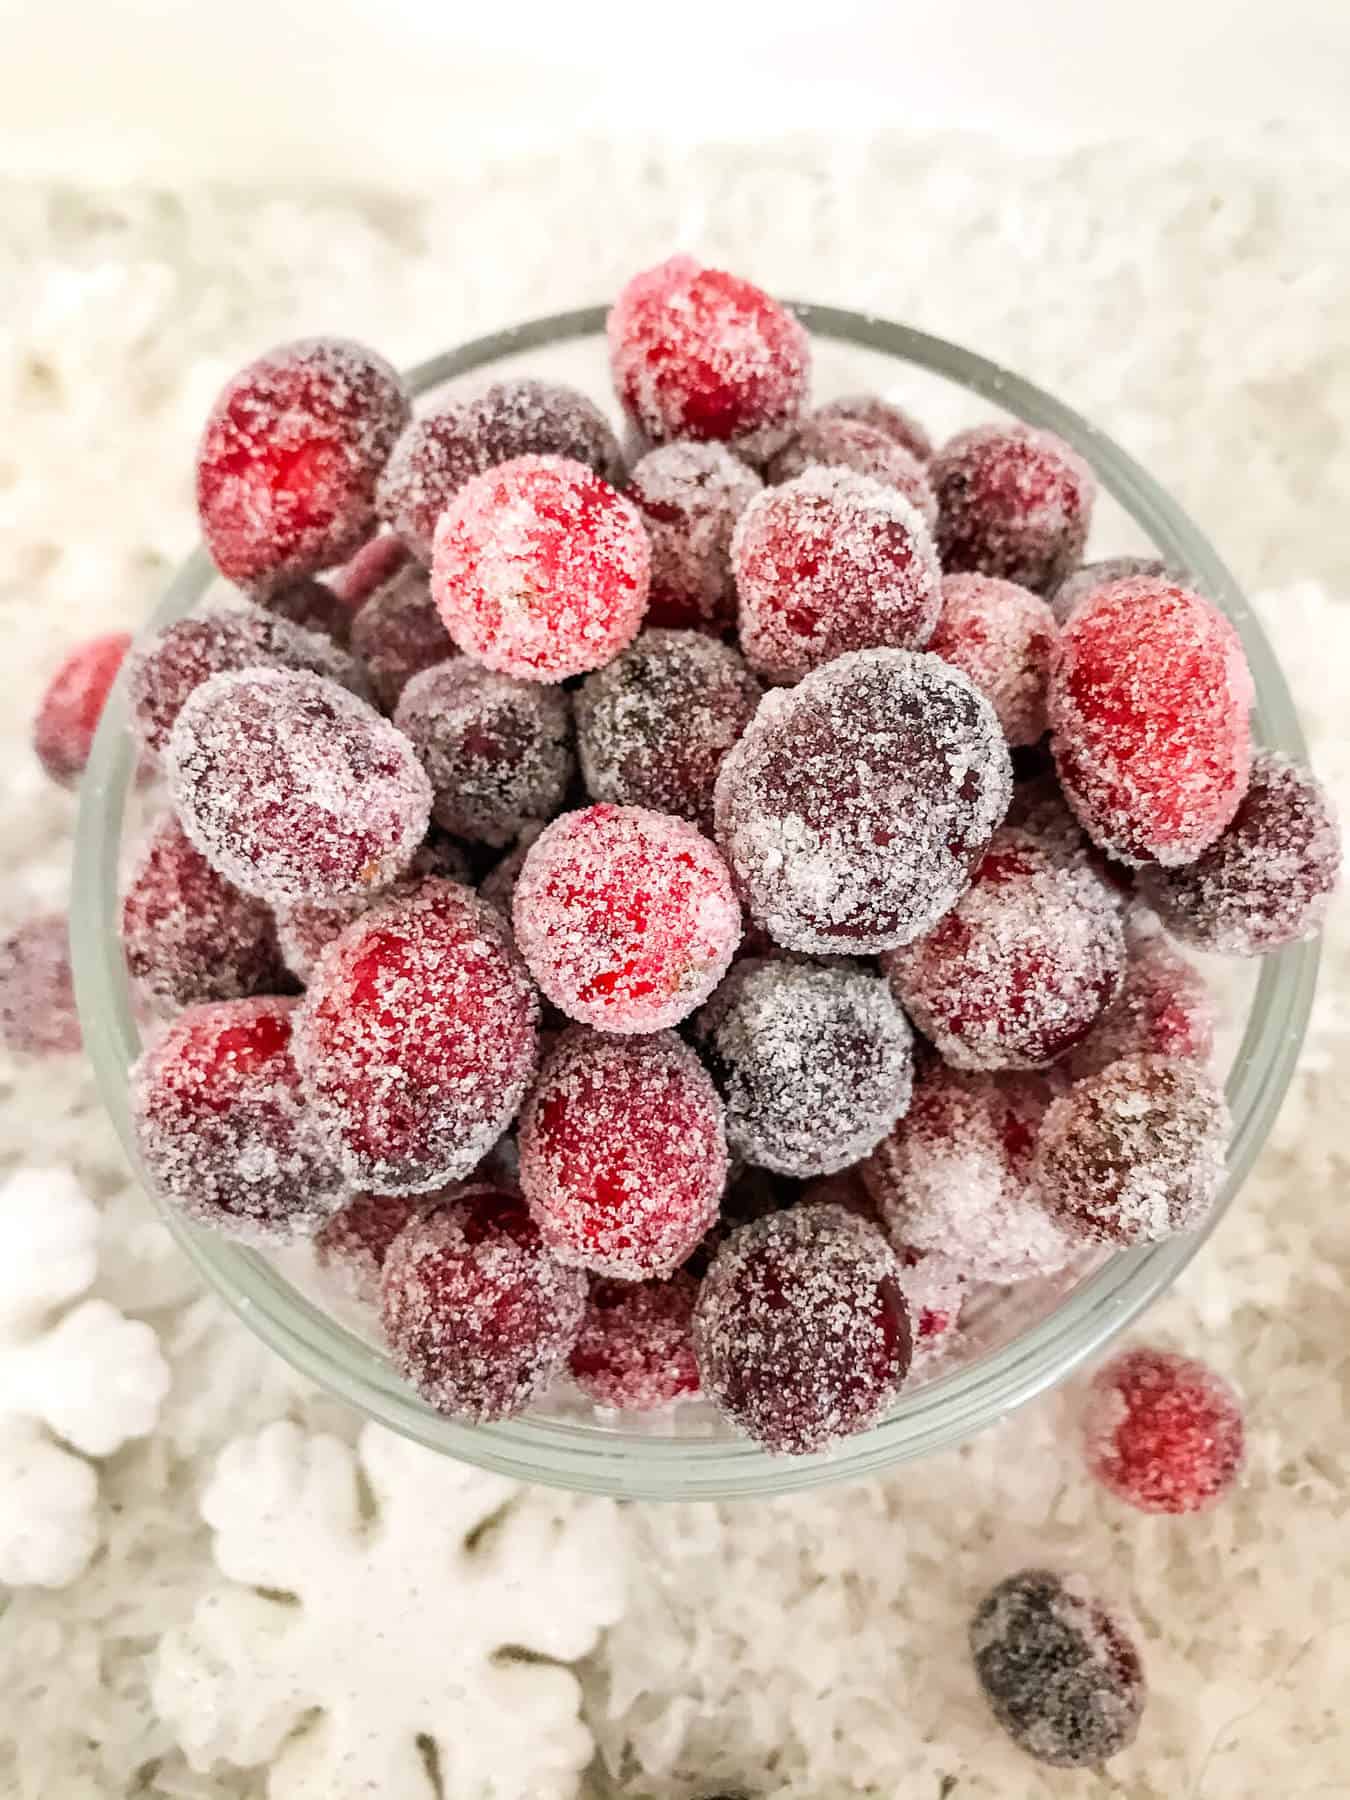 Top view of bowl of Sparkling Cranberries (Sugared Cranberries)